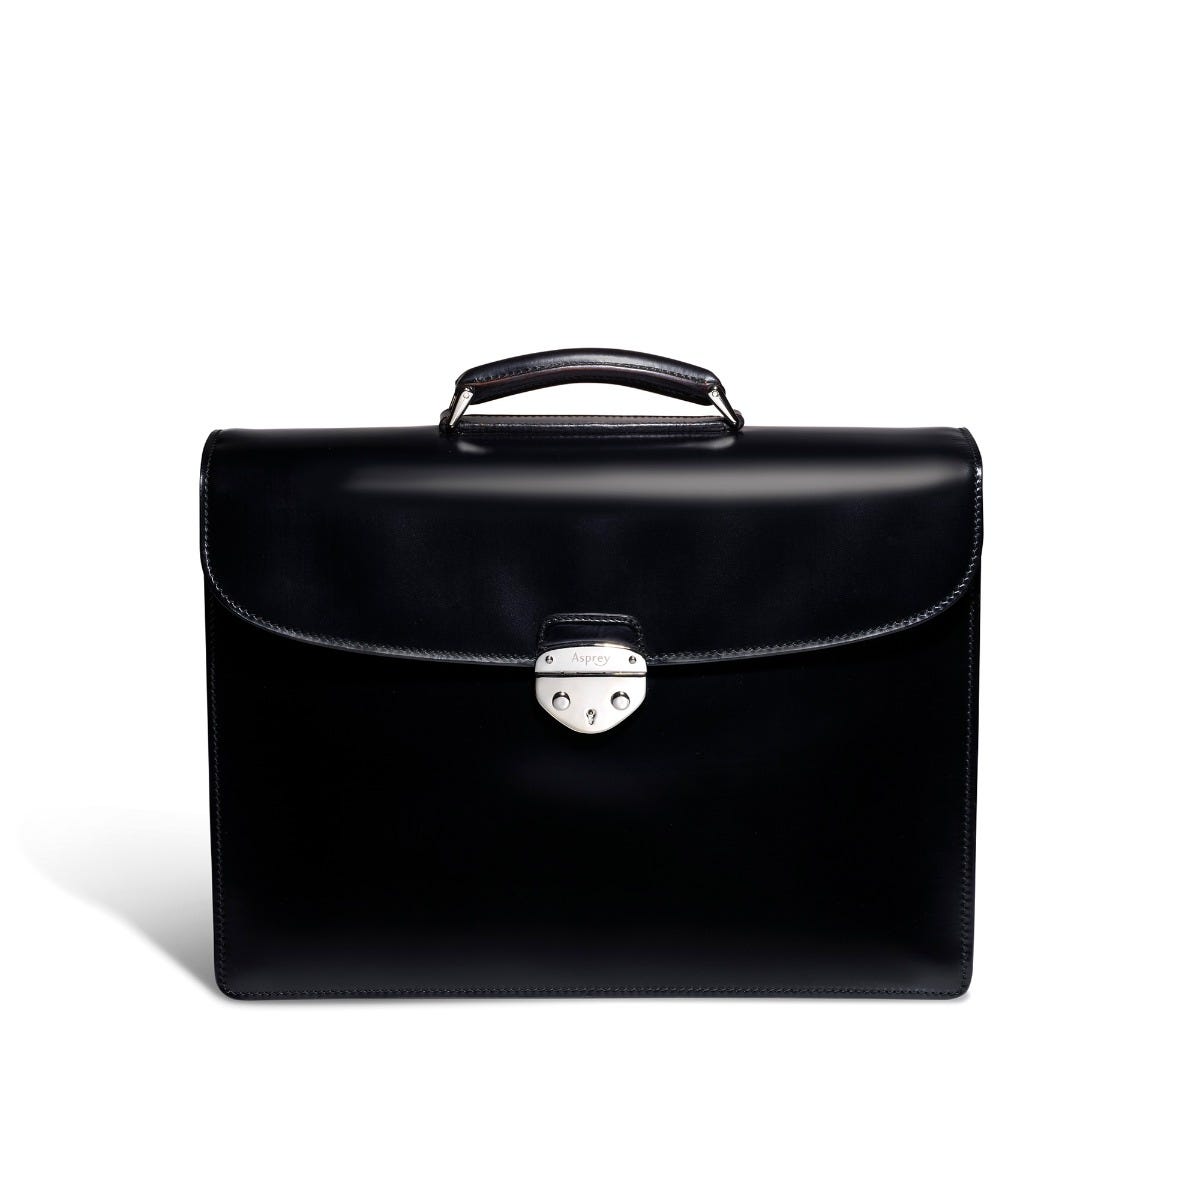 Hanover 3 Briefcase in Saddle Leather